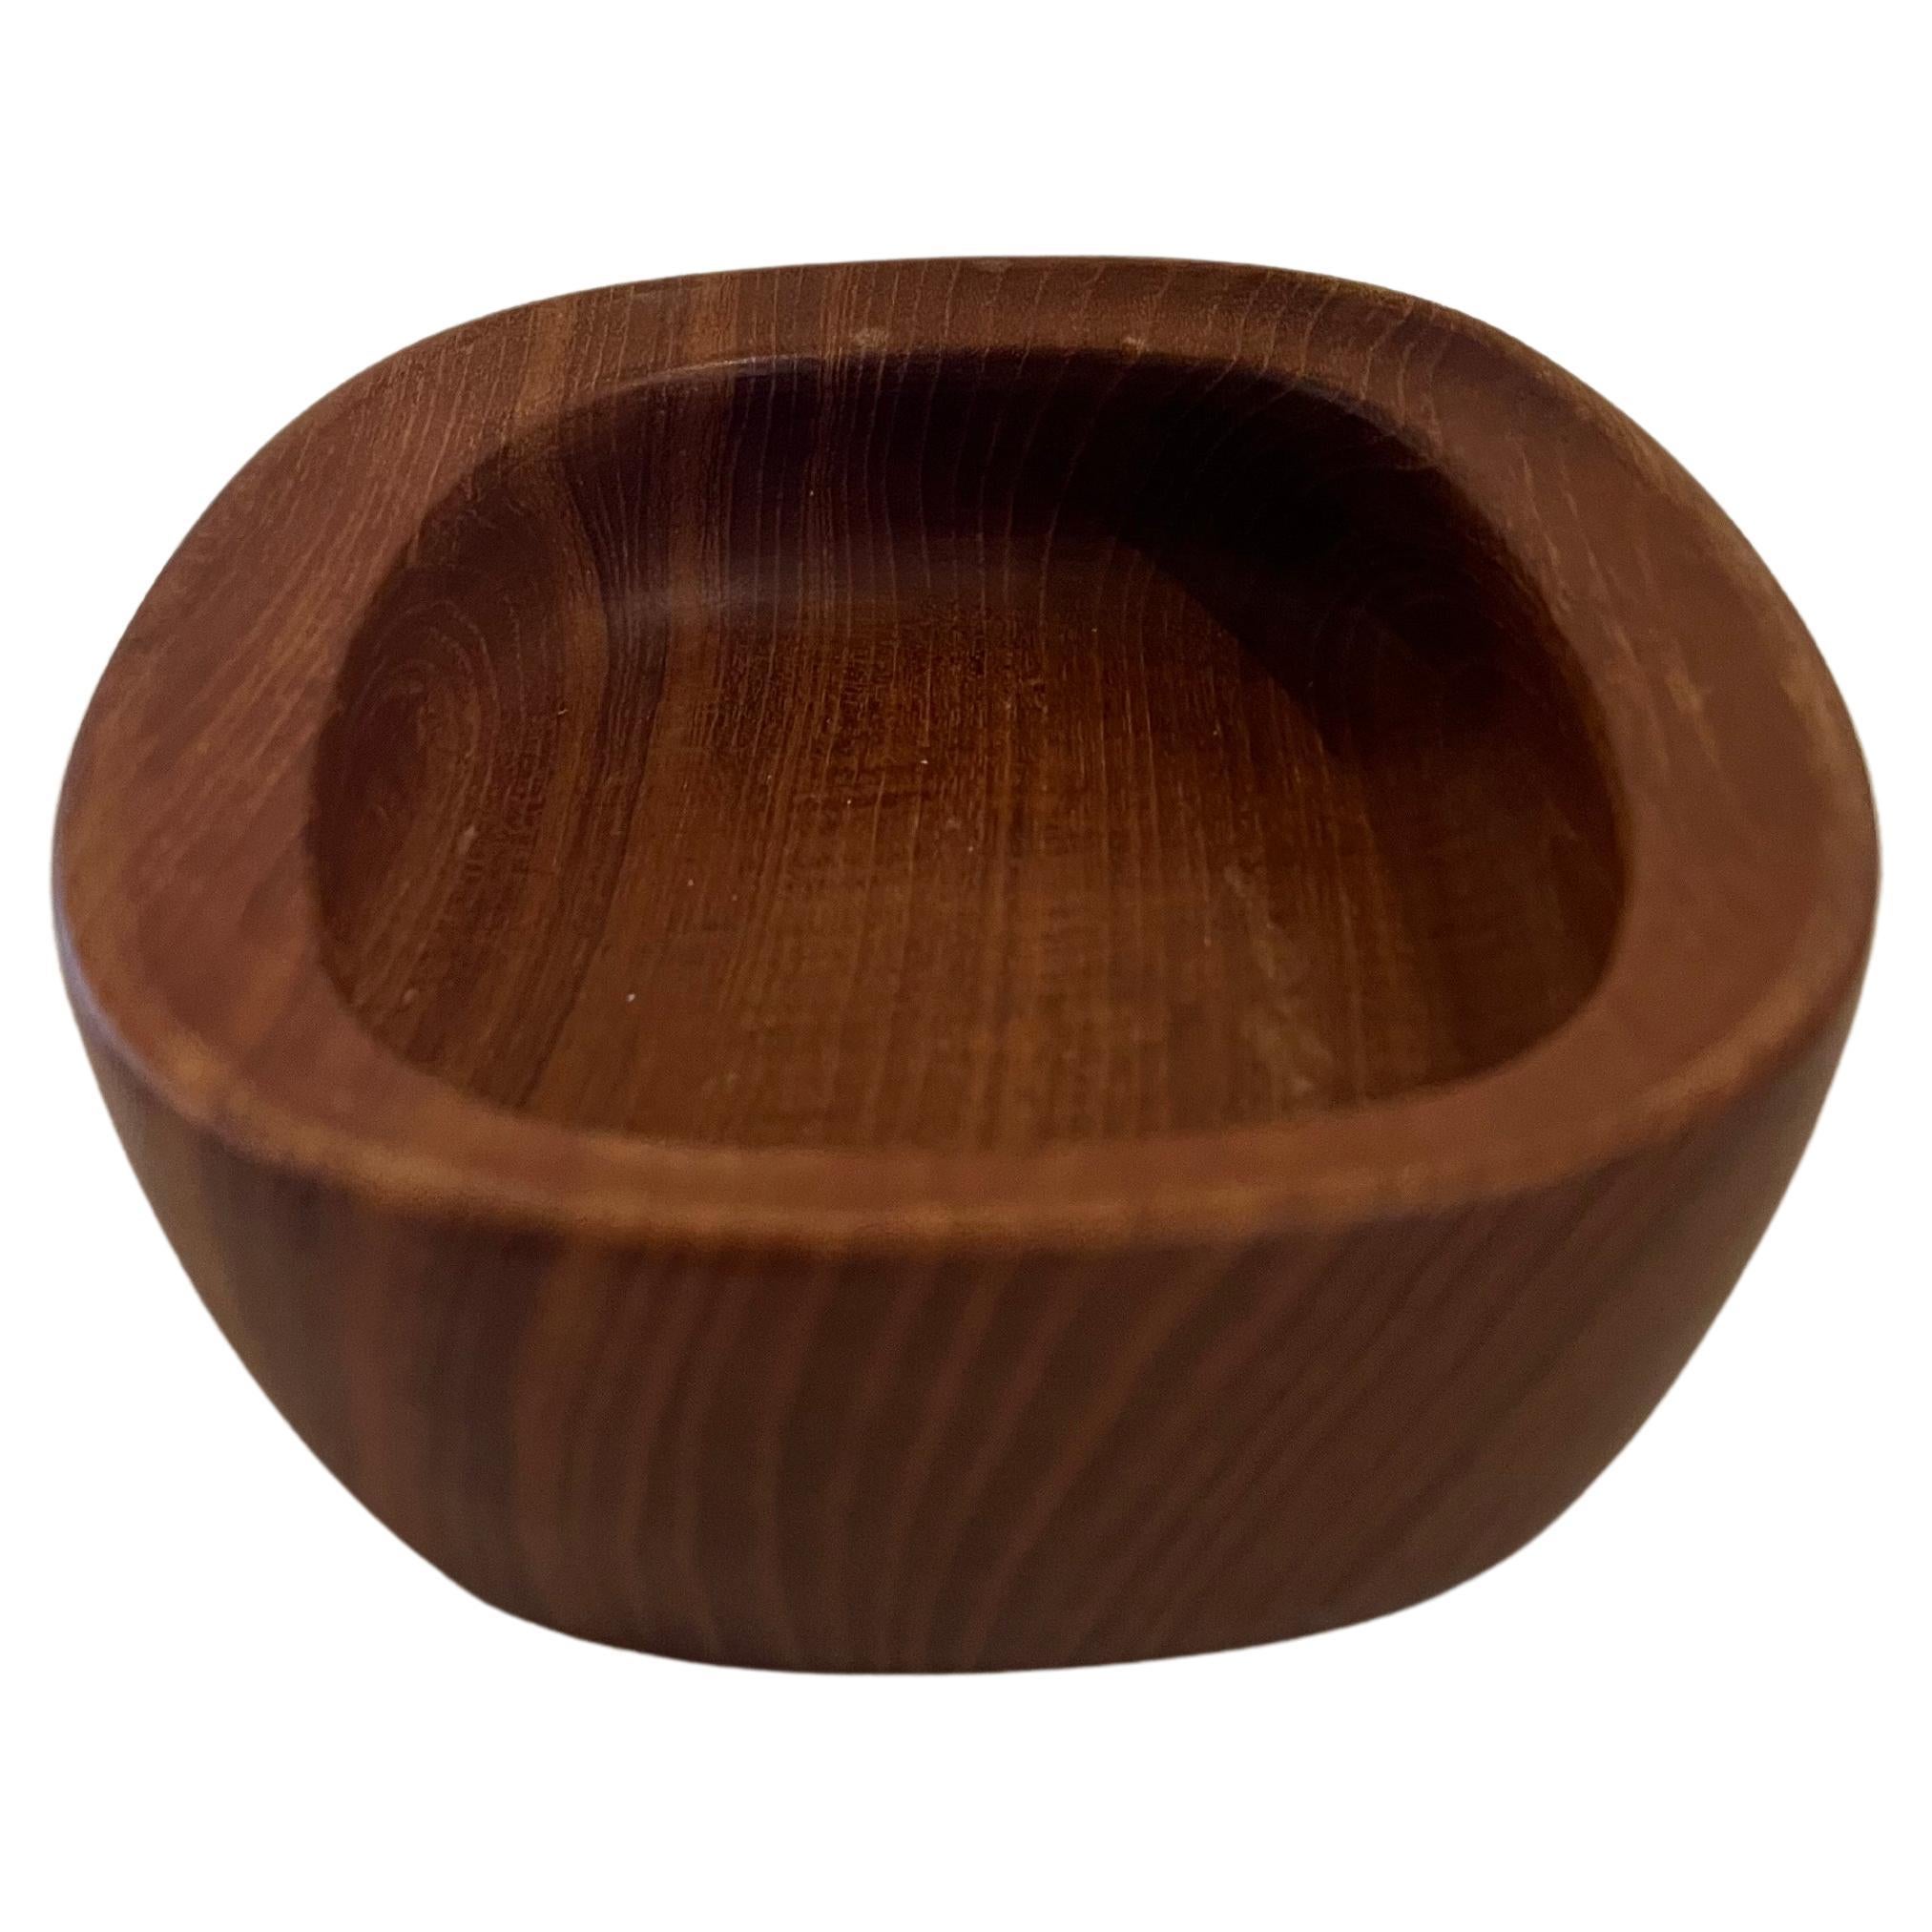 20th Century Petite Solid Teak rare Danish Modern Catch It All Bowl By Nissen For Sale